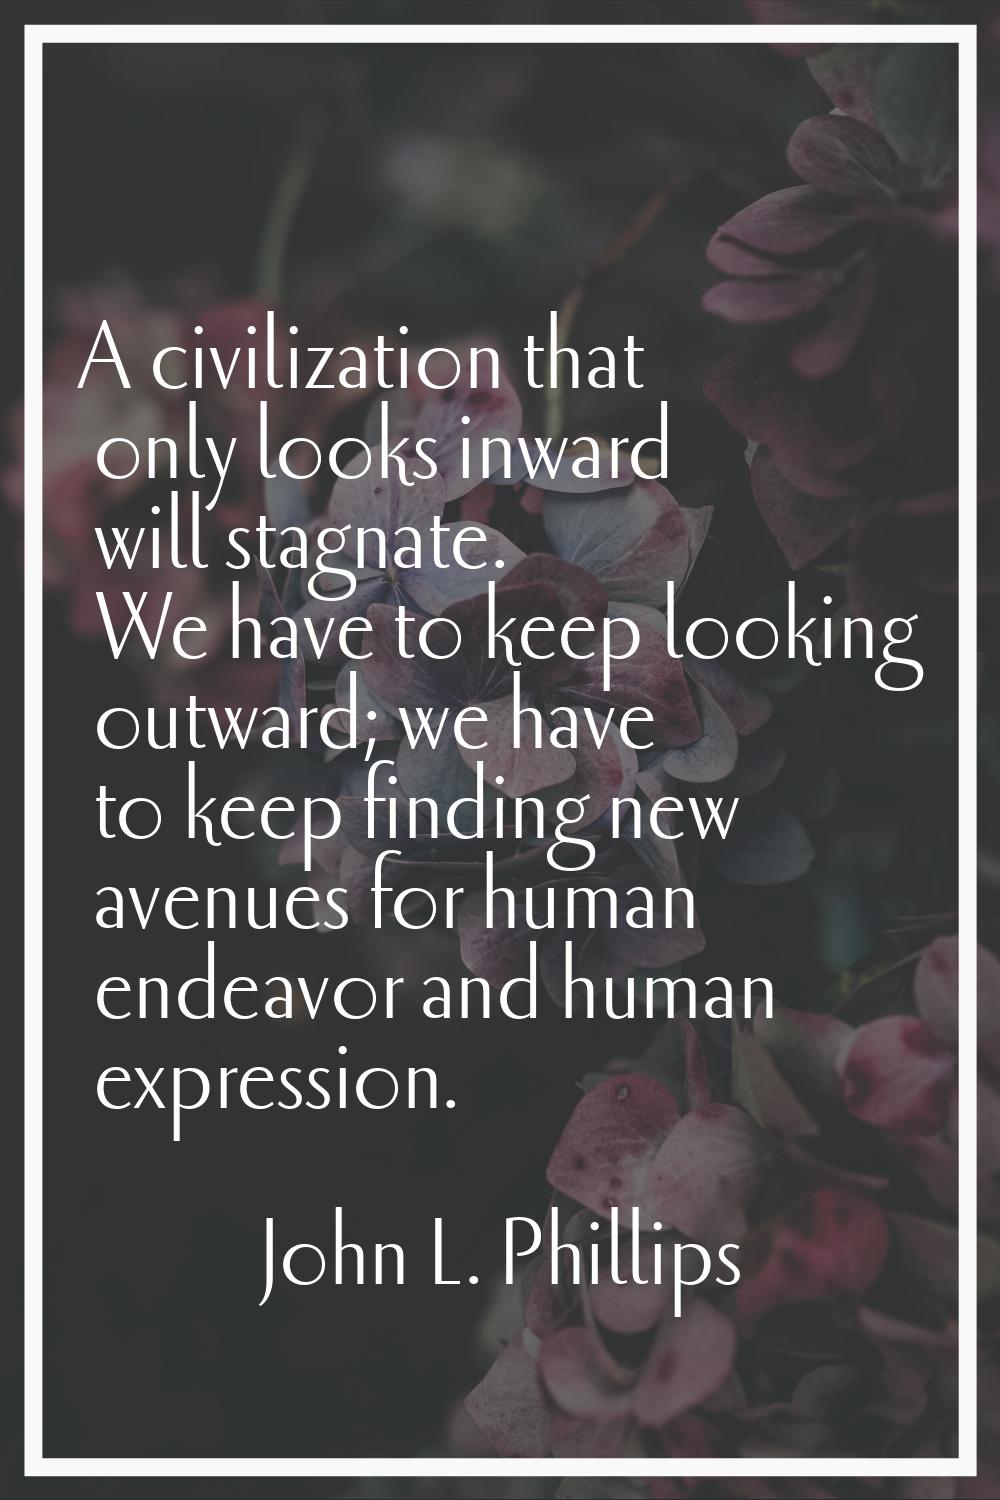 A civilization that only looks inward will stagnate. We have to keep looking outward; we have to ke